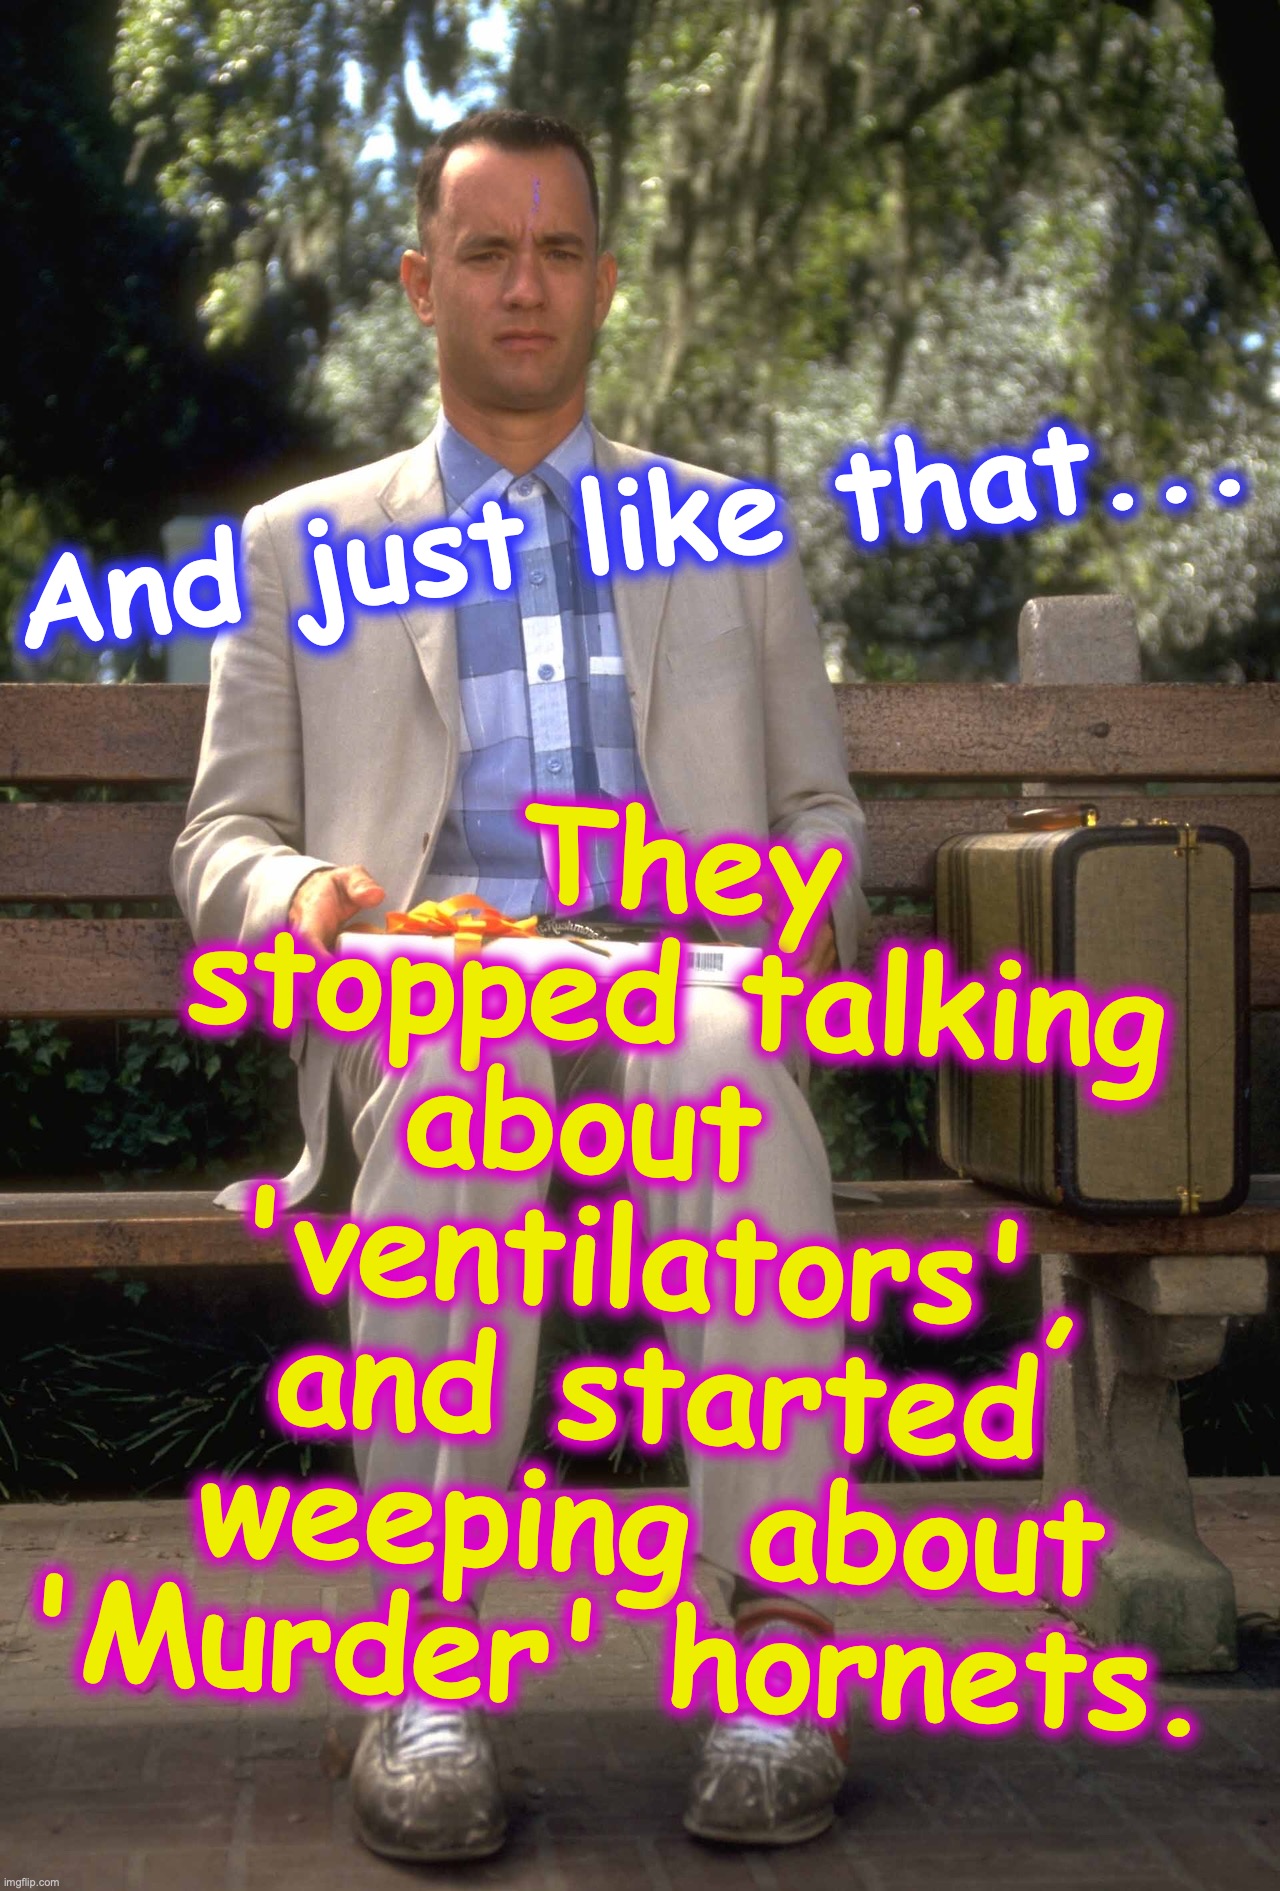 Forrest Gump | They stopped talking about    'ventilators', and started weeping about 'Murder' hornets. And just like that... | image tagged in forrest gump,covid-19,murder hornets | made w/ Imgflip meme maker